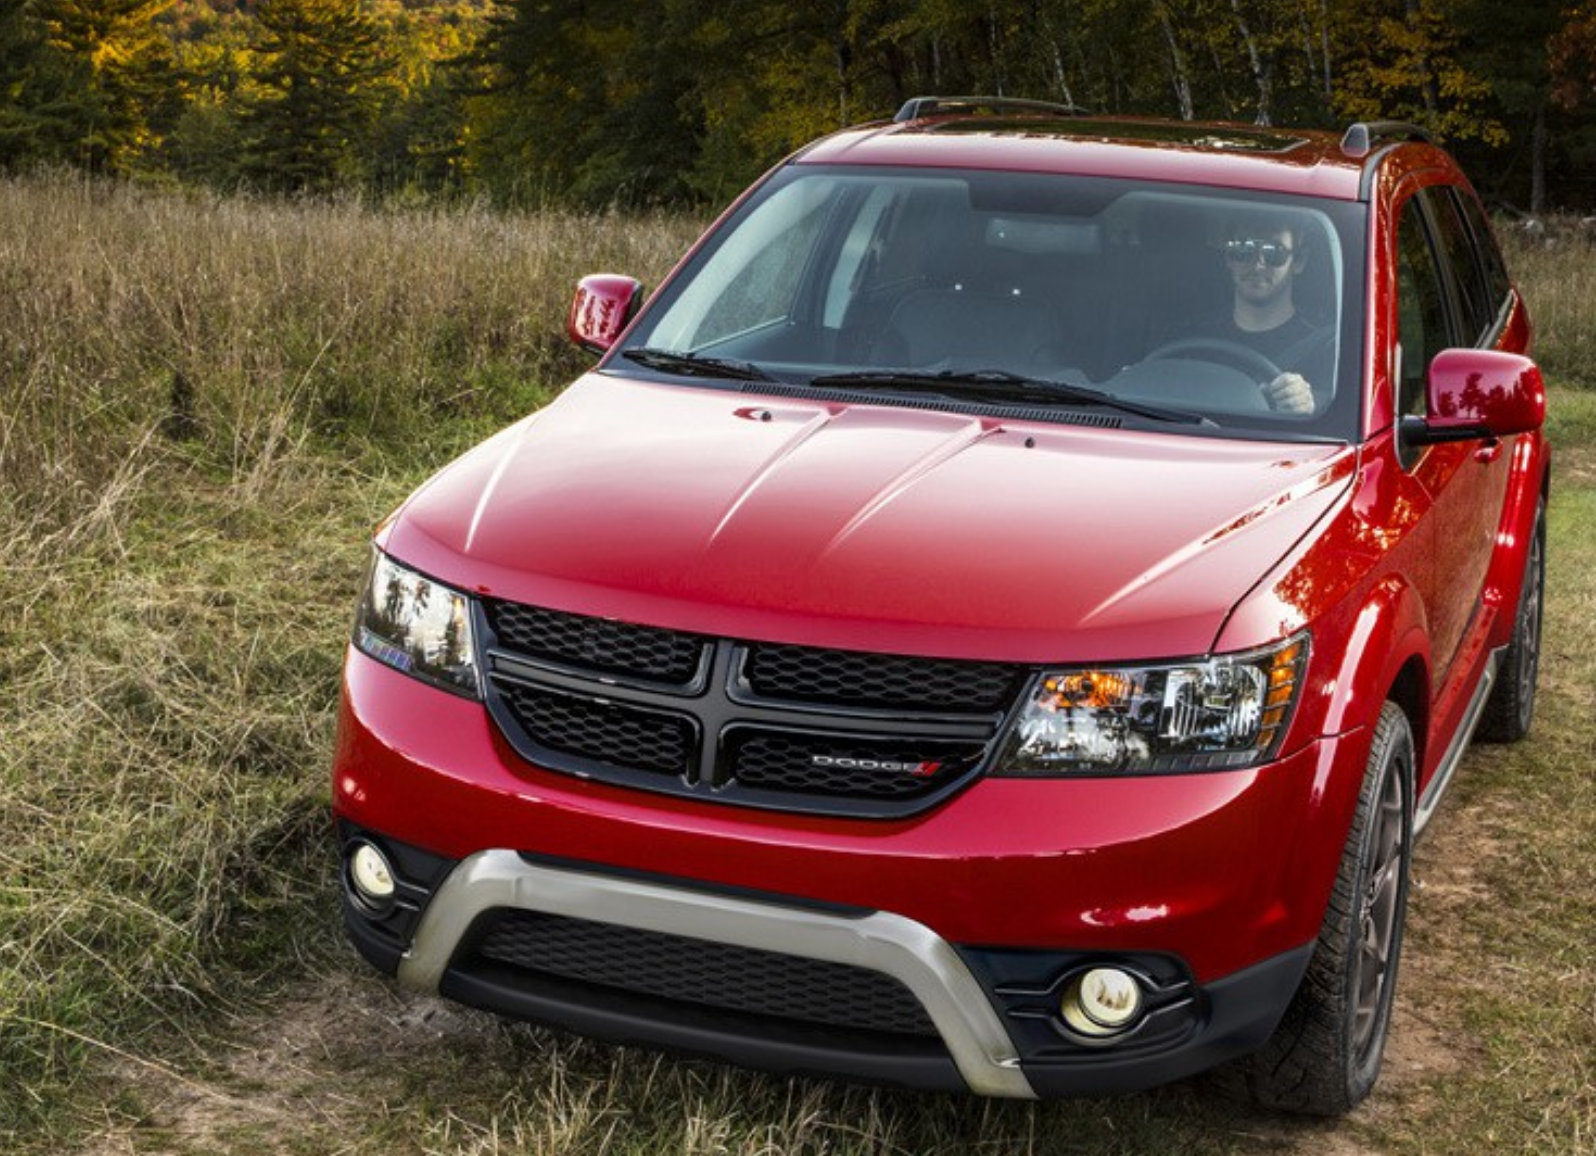 Meet the 2014 Dodge Journey Crossroad | The Daily Drive | Consumer Guide®  The Daily Drive | Consumer Guide®